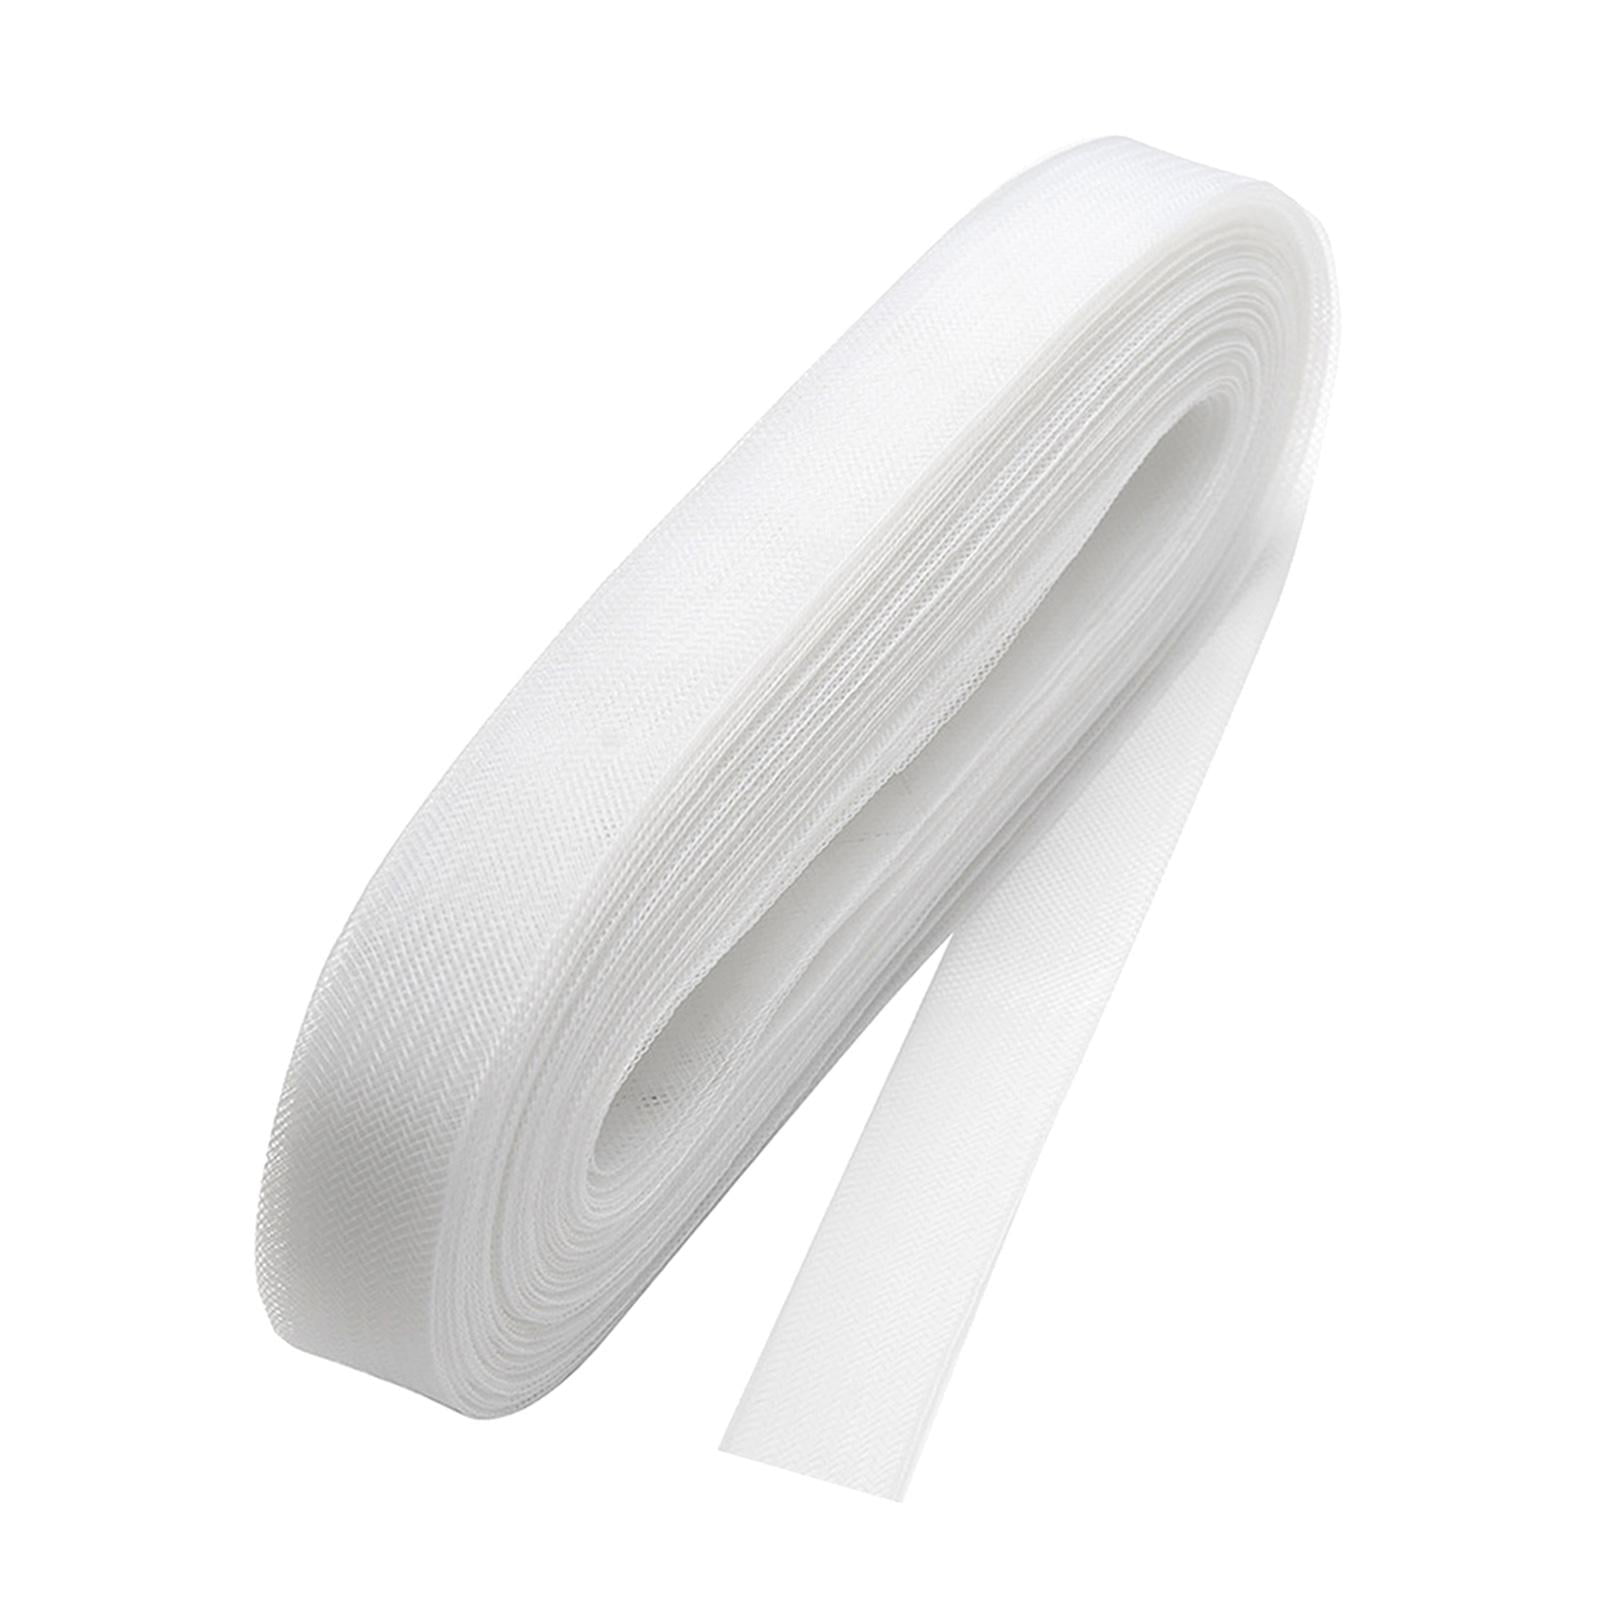 White, 2 inch Width Yolyoo 50 Yards Stiff Polyester Horsehair Braid for Sewing Wedding Dress Formal Dress Accessories 